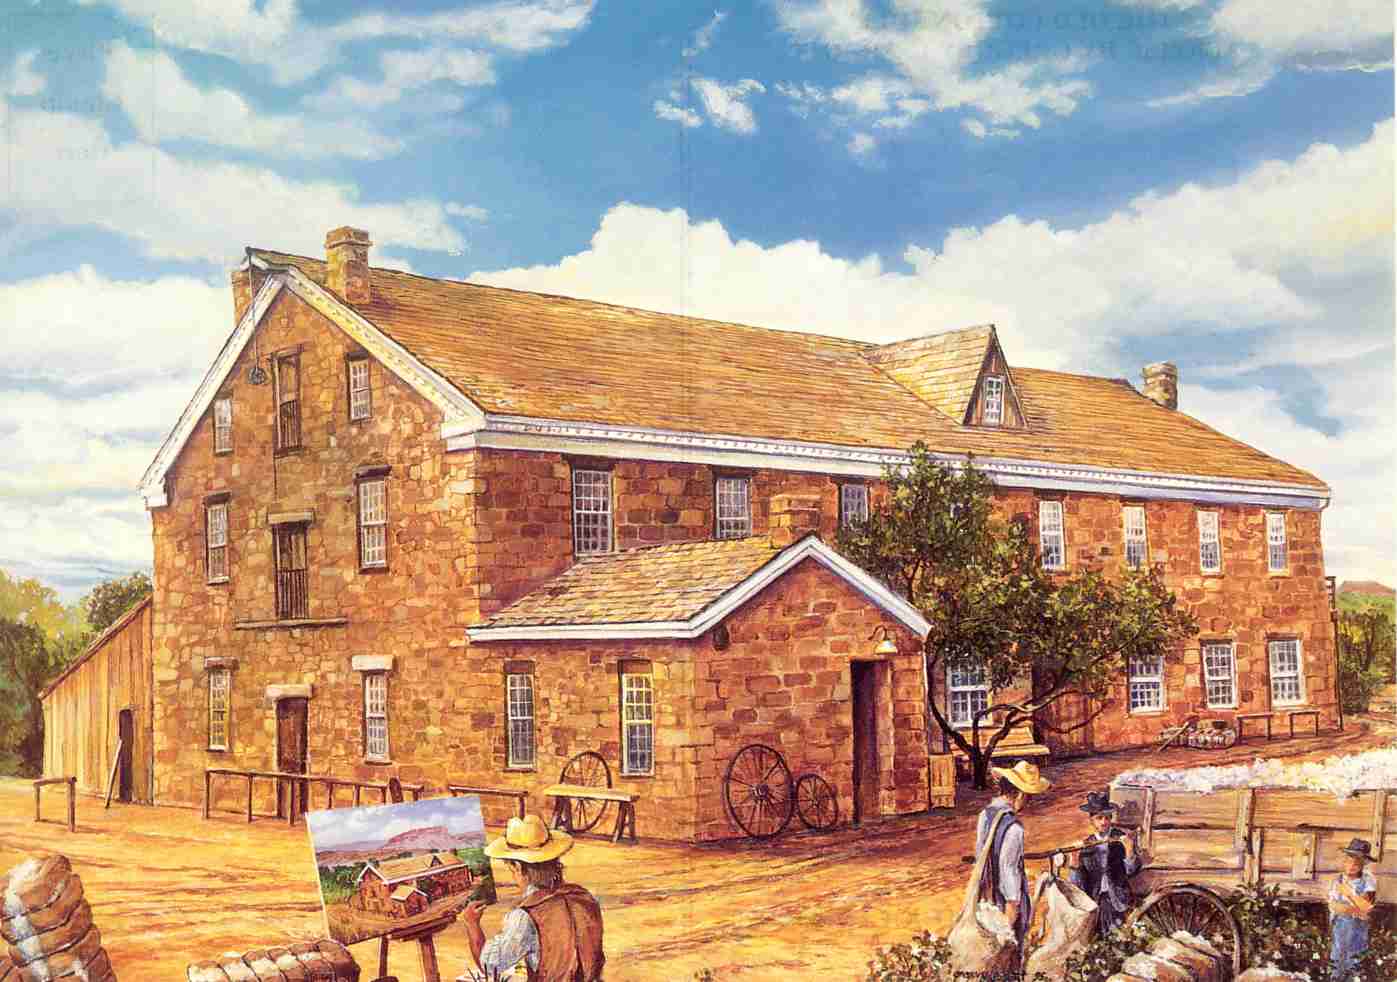 Painting of the Washington Cotton Mill